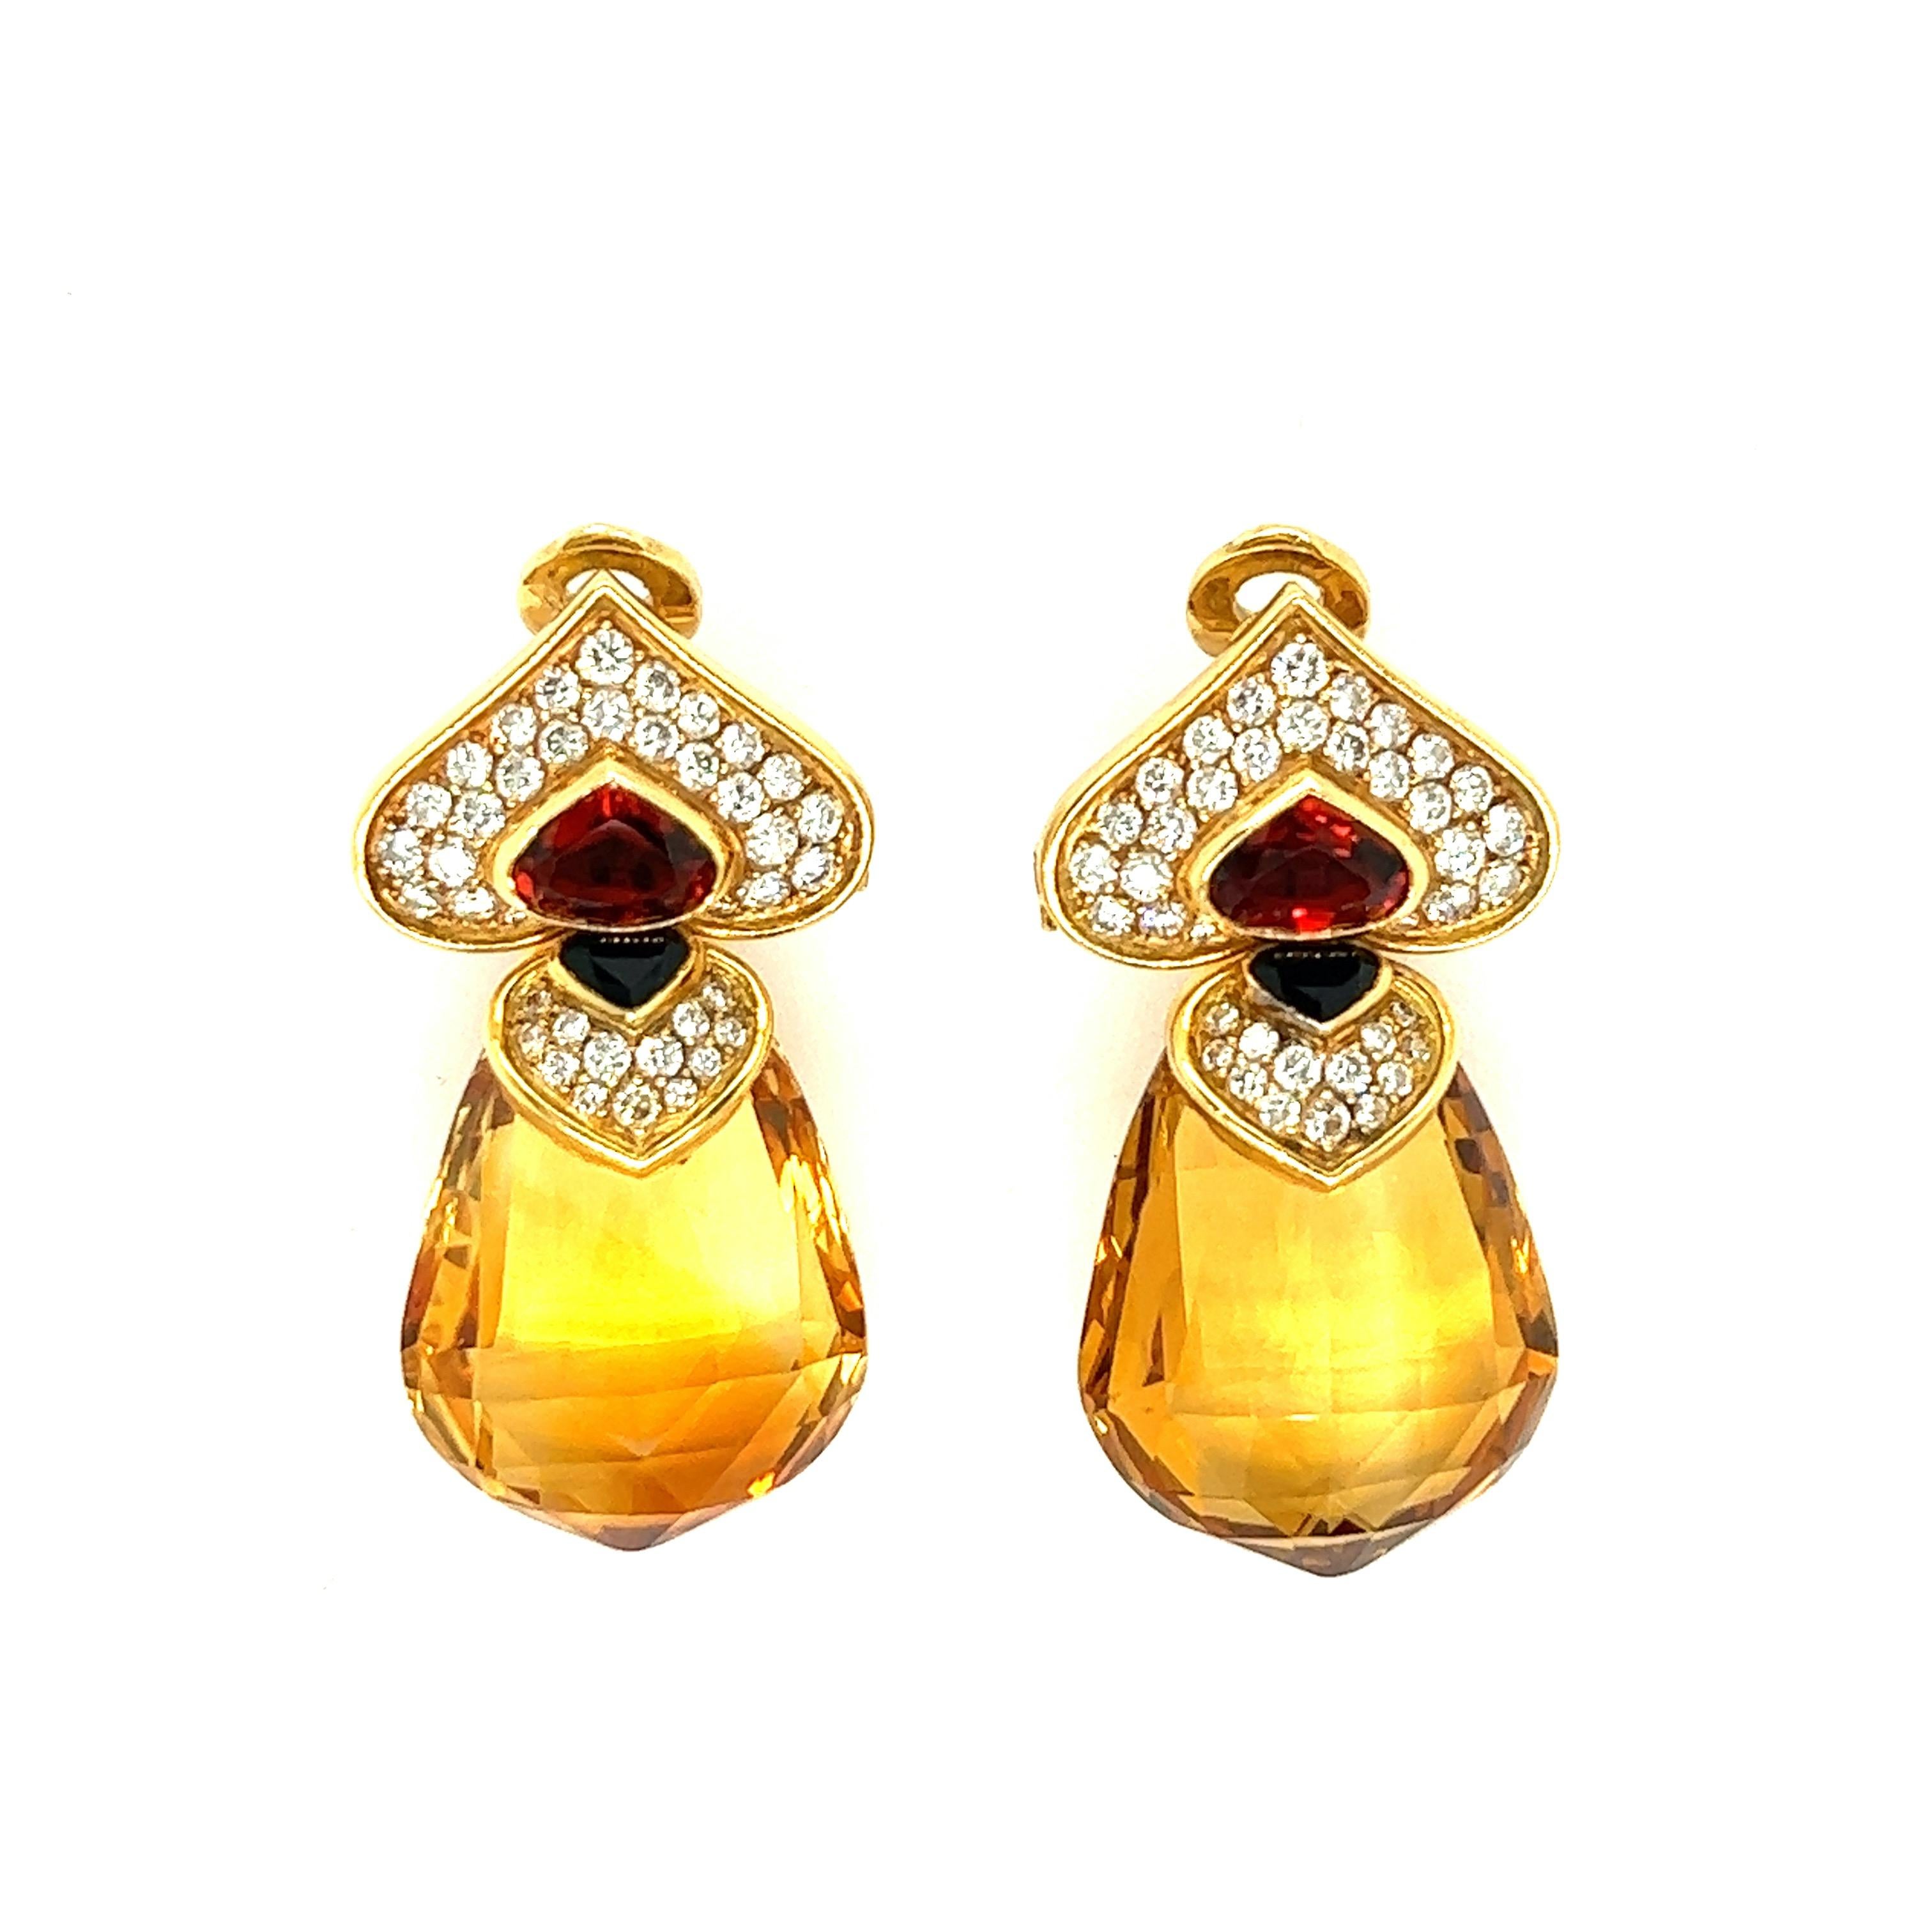 Marina B Citrine Diamond Quartz Drop Ear Clips, French

A pair of stunning multi-gems ear clips by Marina B, featuring large drop (21.70 mm x 27 mm) and bezel-set pear-shaped citrines of approximately 70 carats total, bezel-set pear-shaped smoked